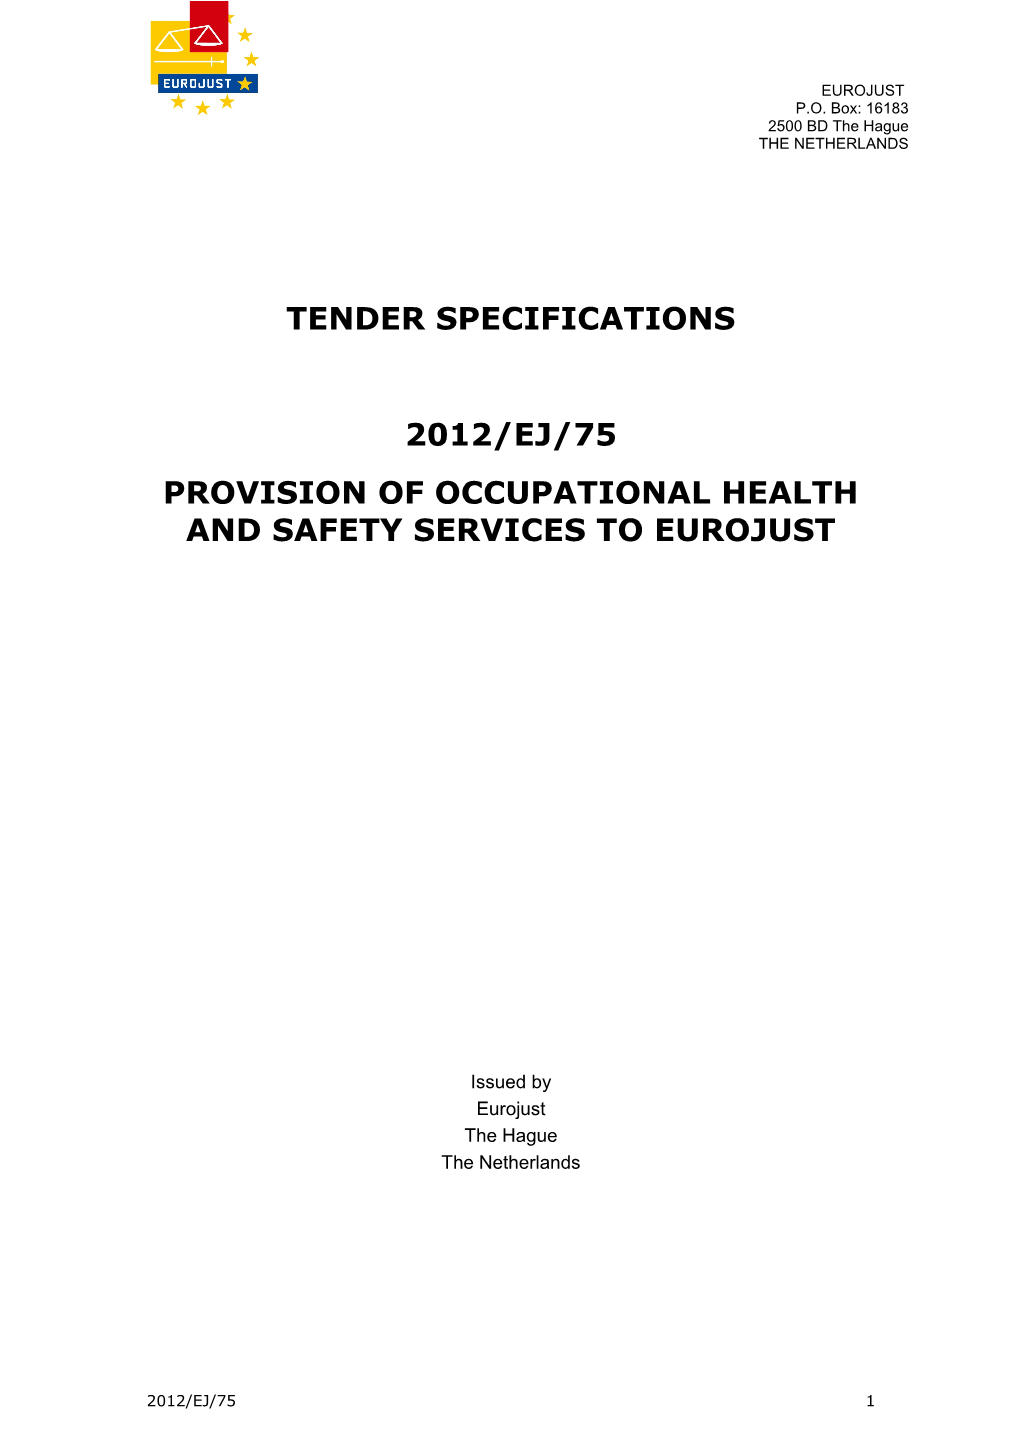 Provision Ofoccupational Health and Safety Services to Eurojust